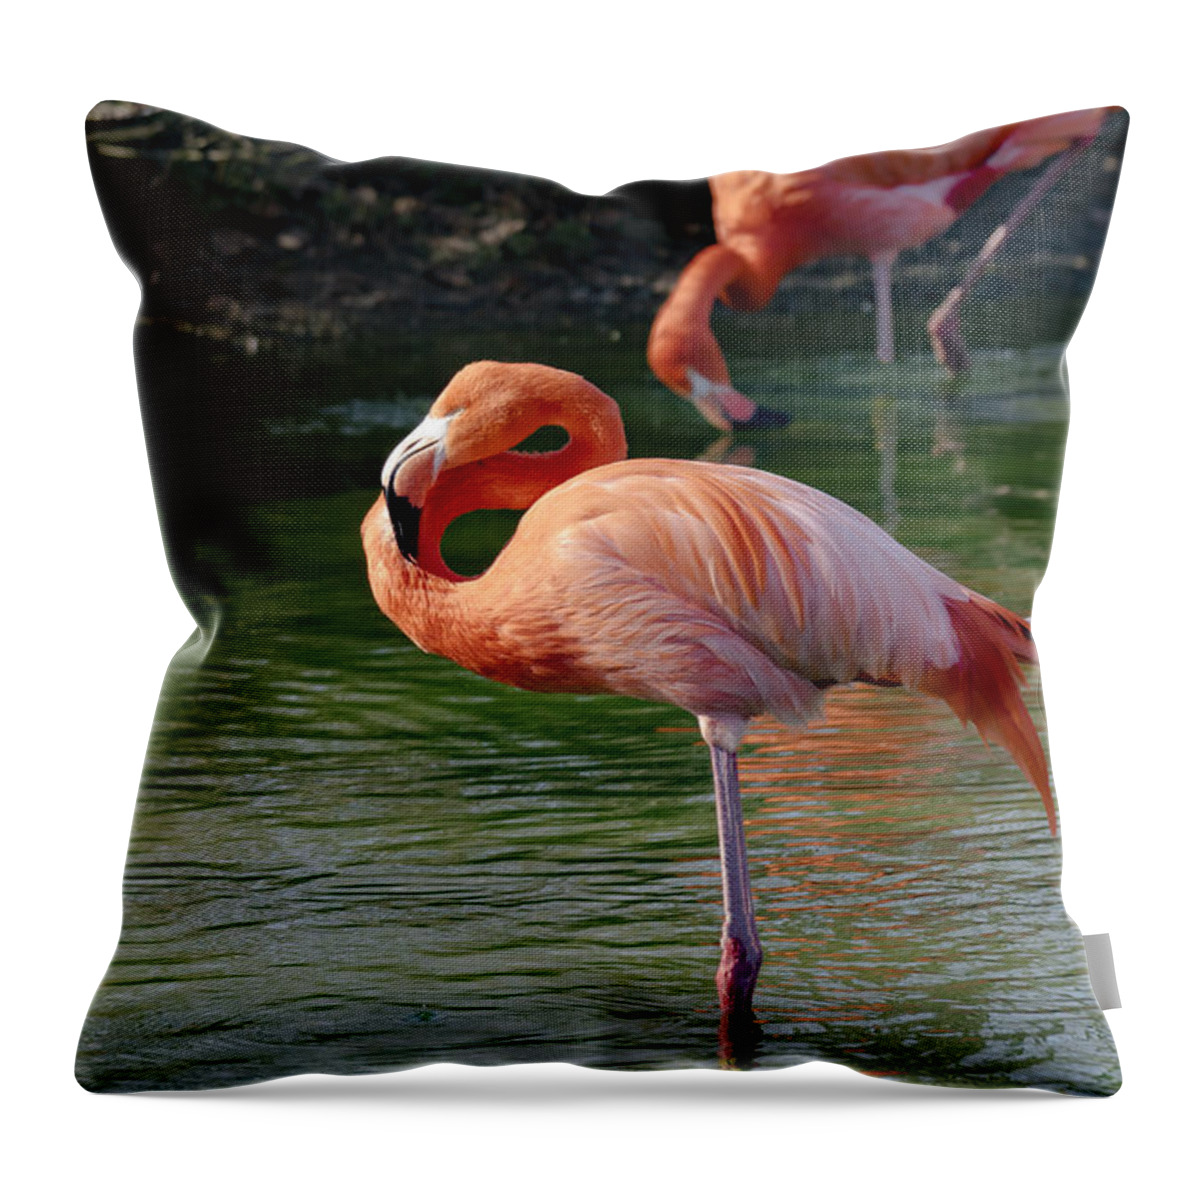 Pink Flamingo Throw Pillow featuring the photograph Pink Flamingo by Scott Carruthers